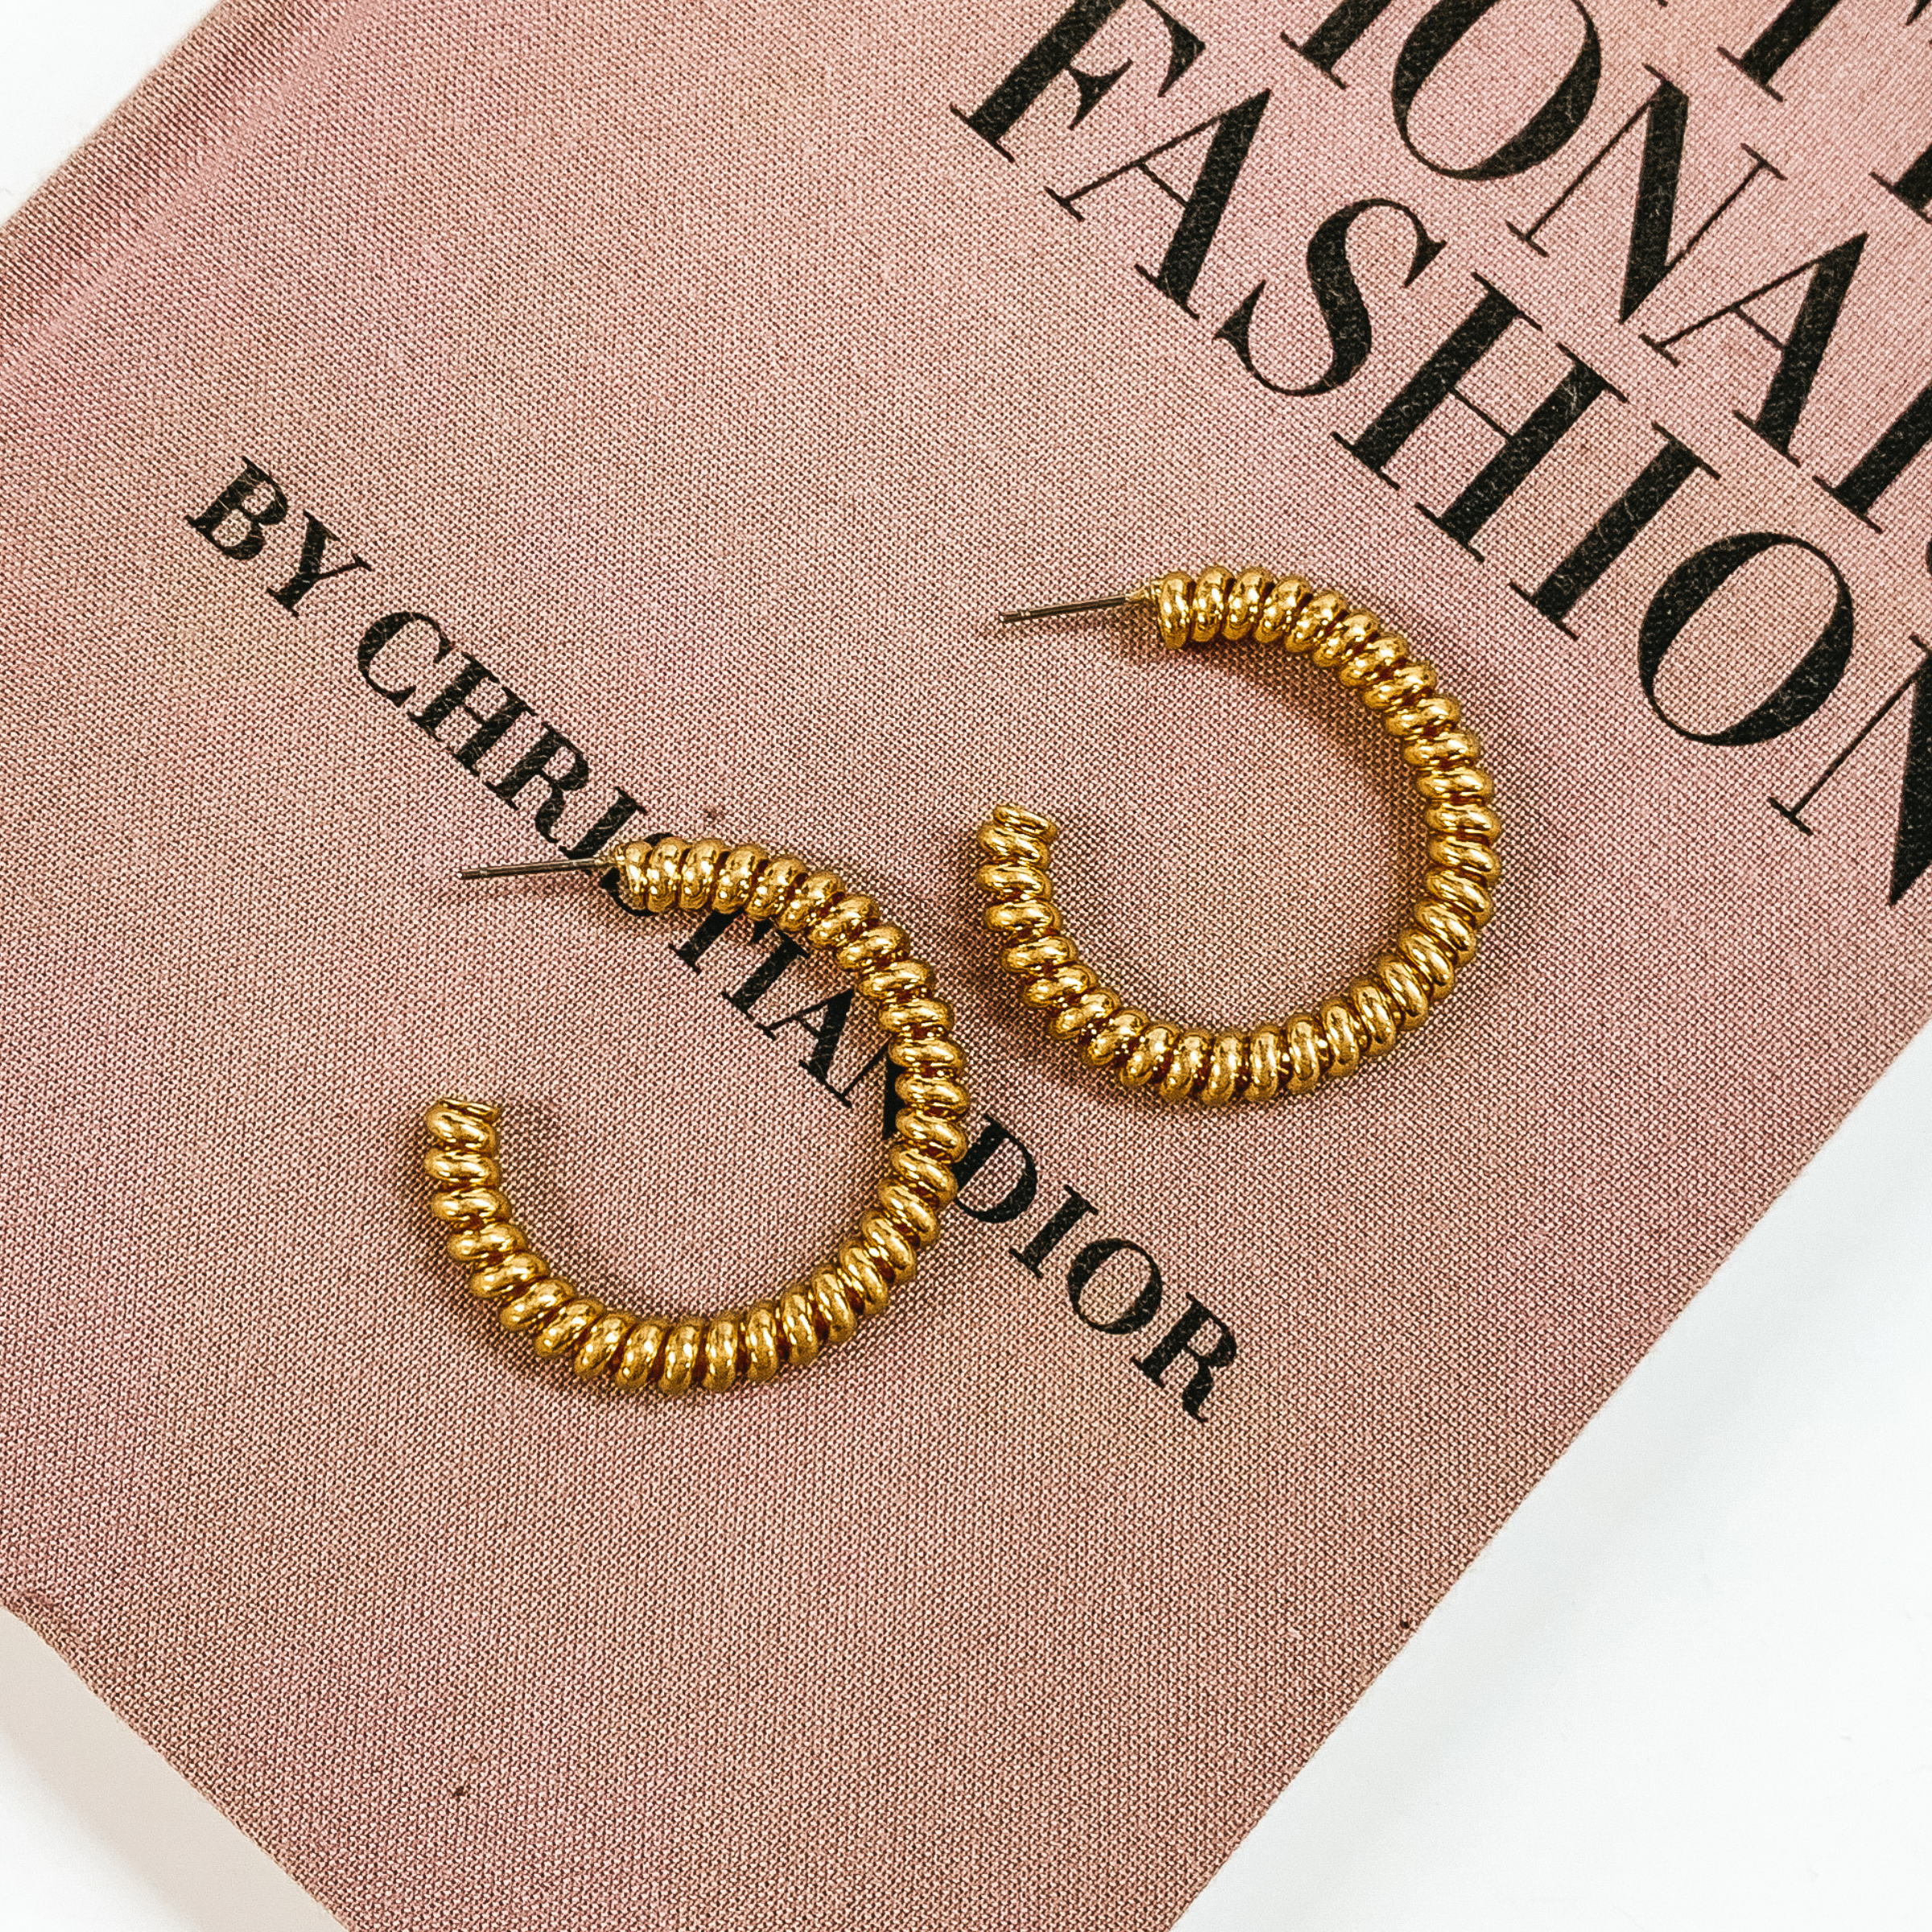 Gold, spiral hoop earrings pictured on a mauve colored book on a white background. 